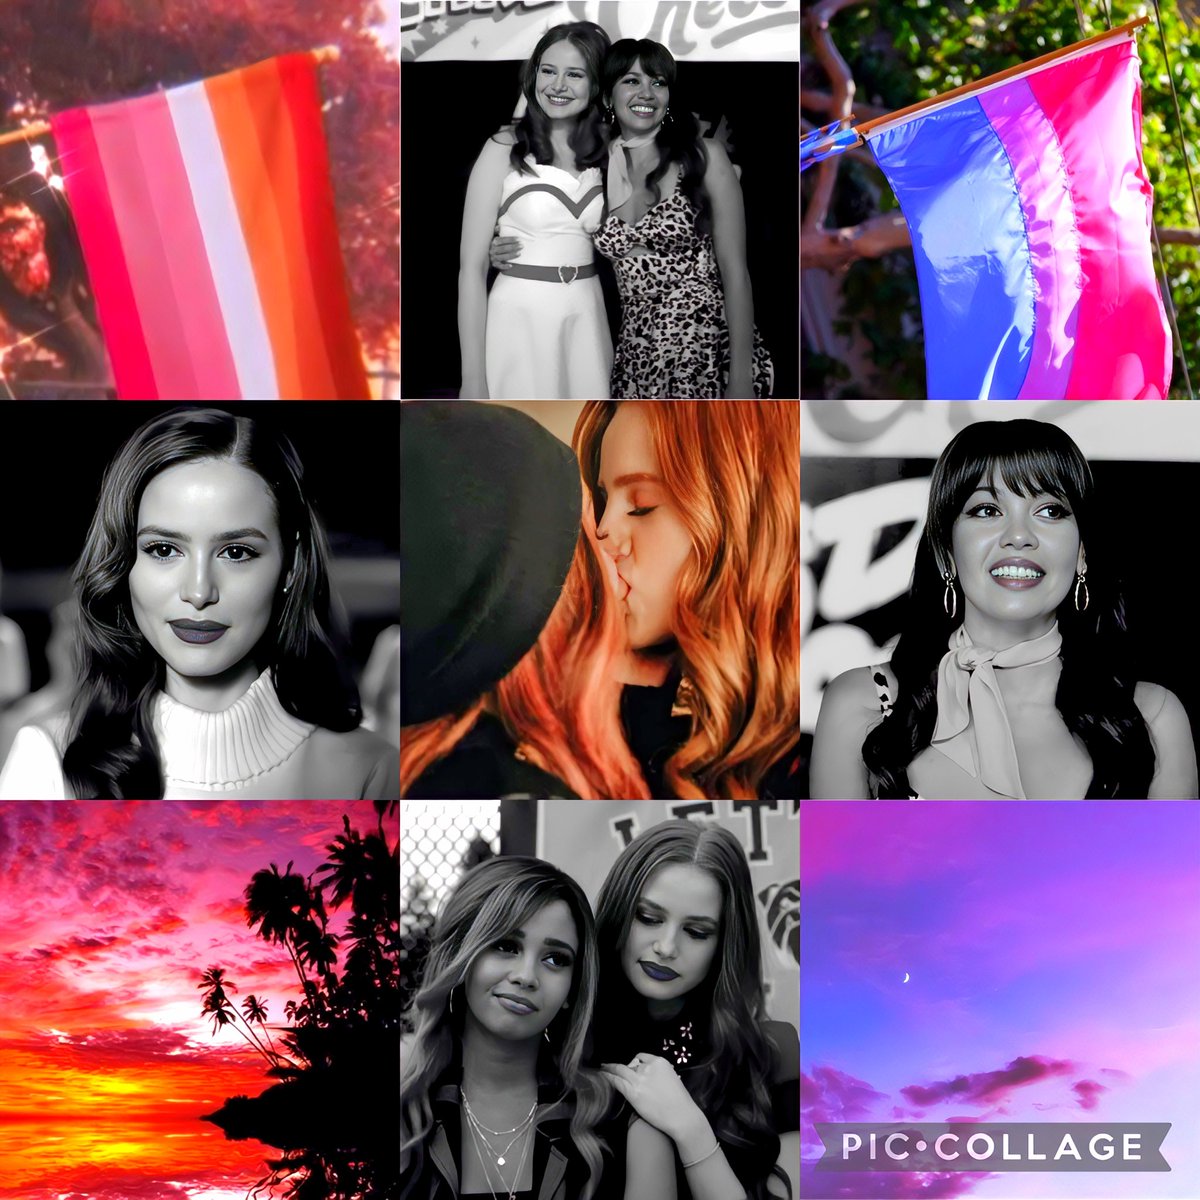 Happy #ChoniTuesday 🖤💚❤️ Here is my LGBT flag edit of Cheryl and Toni 💕 Ofcourse Cheryl is a proud lesbian and Toni is a proud bisexual 🩷💜🩷💜 #CW #Riverdale #ArchieComics #choni #cherylblossom #tonitopaz #LGBTQ #sapphic #lesbian #bisexual